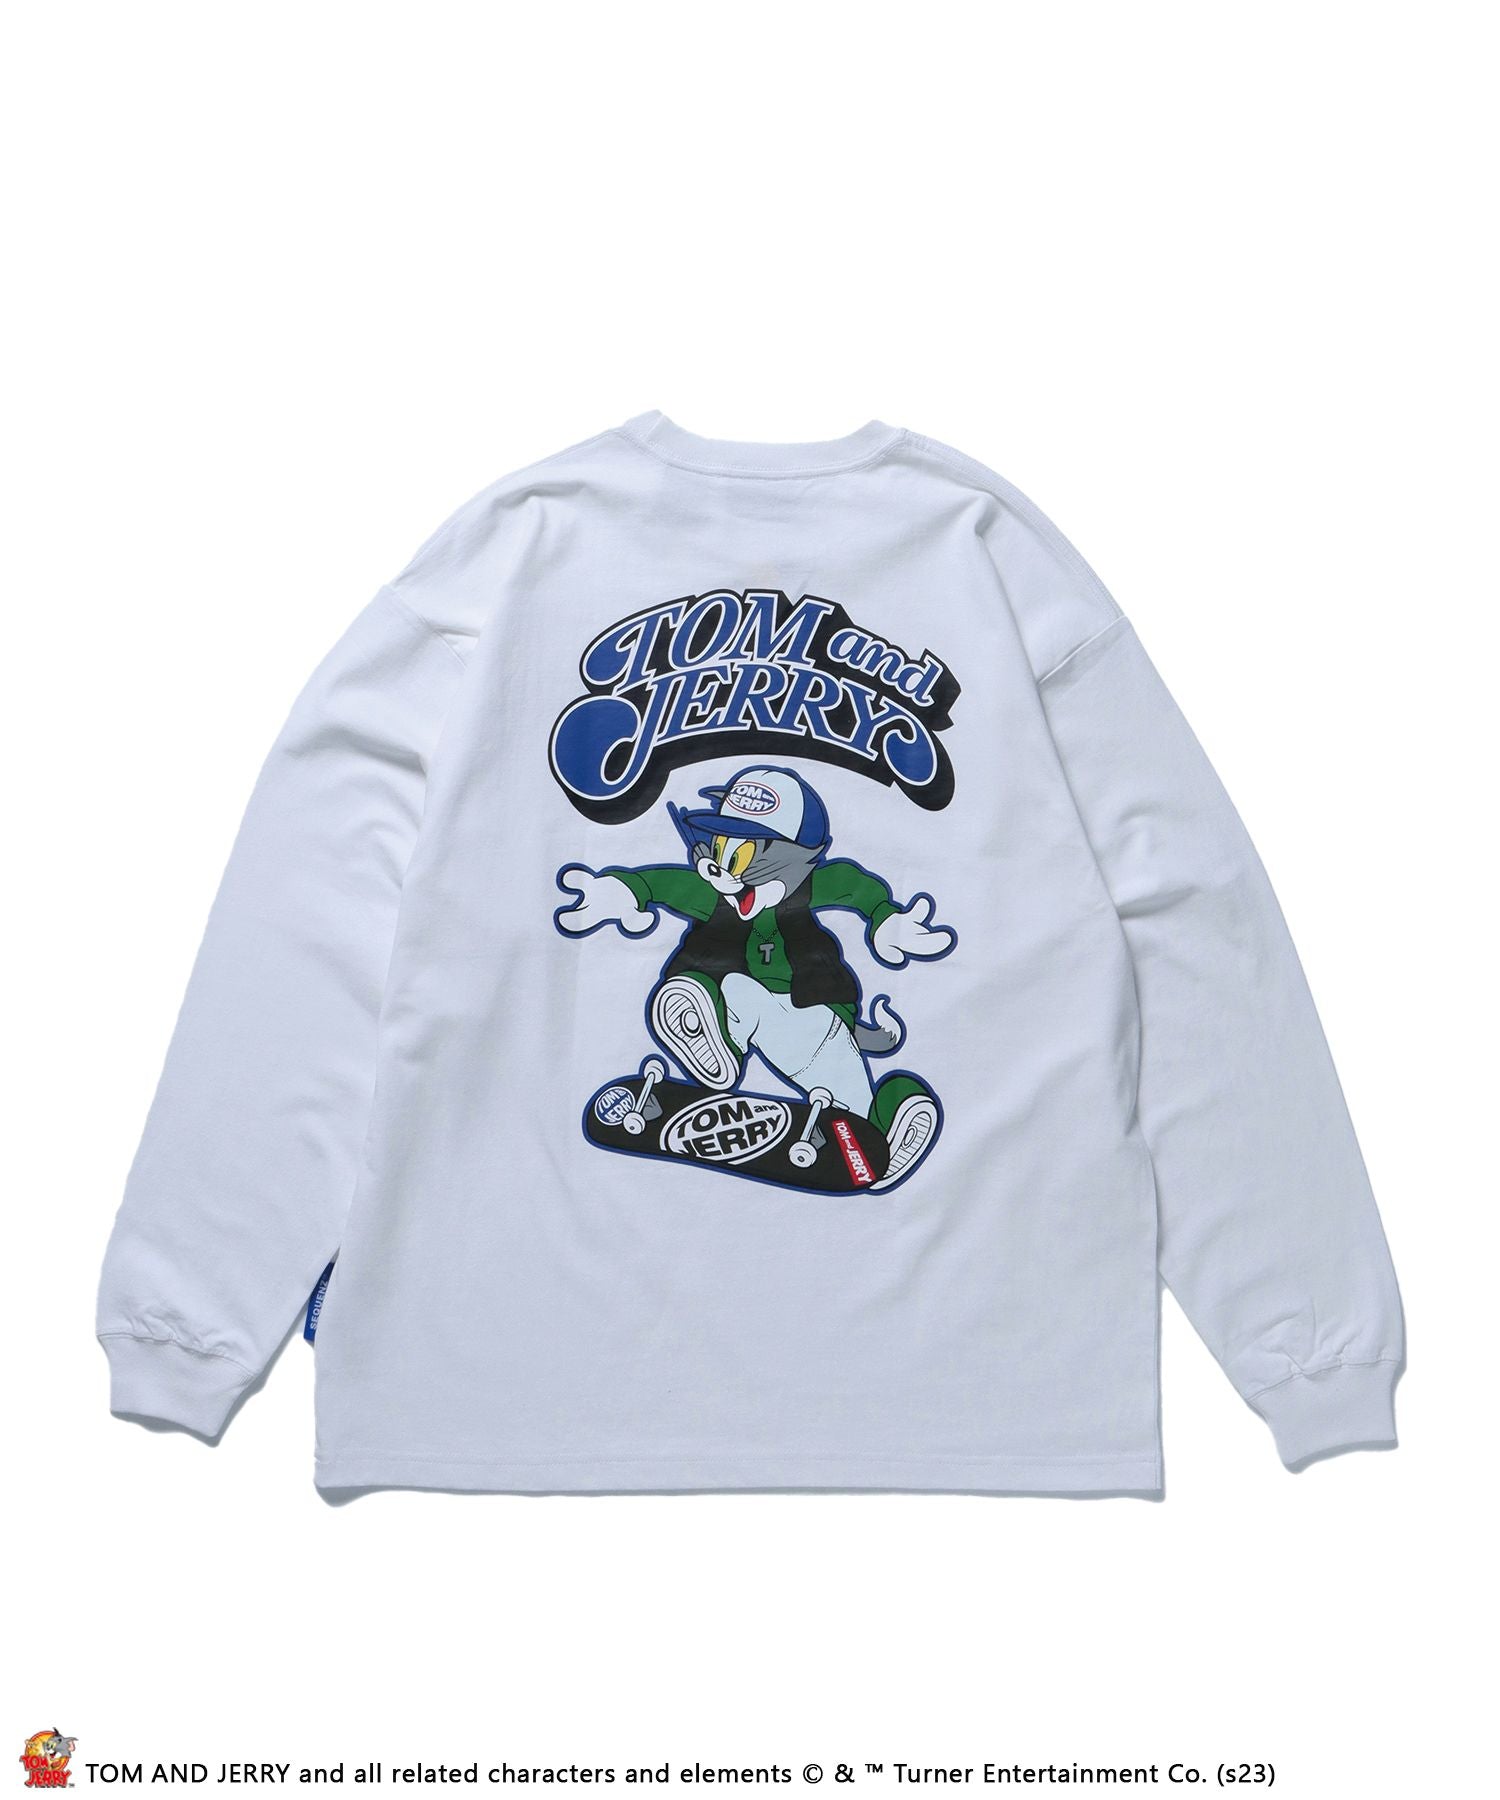 【SEQUENZ】 TOM and JERRY SK8ER L/S TEE / トムとジェリー ロンT ビックサイズ キャラクター バックプリント  ホワイト